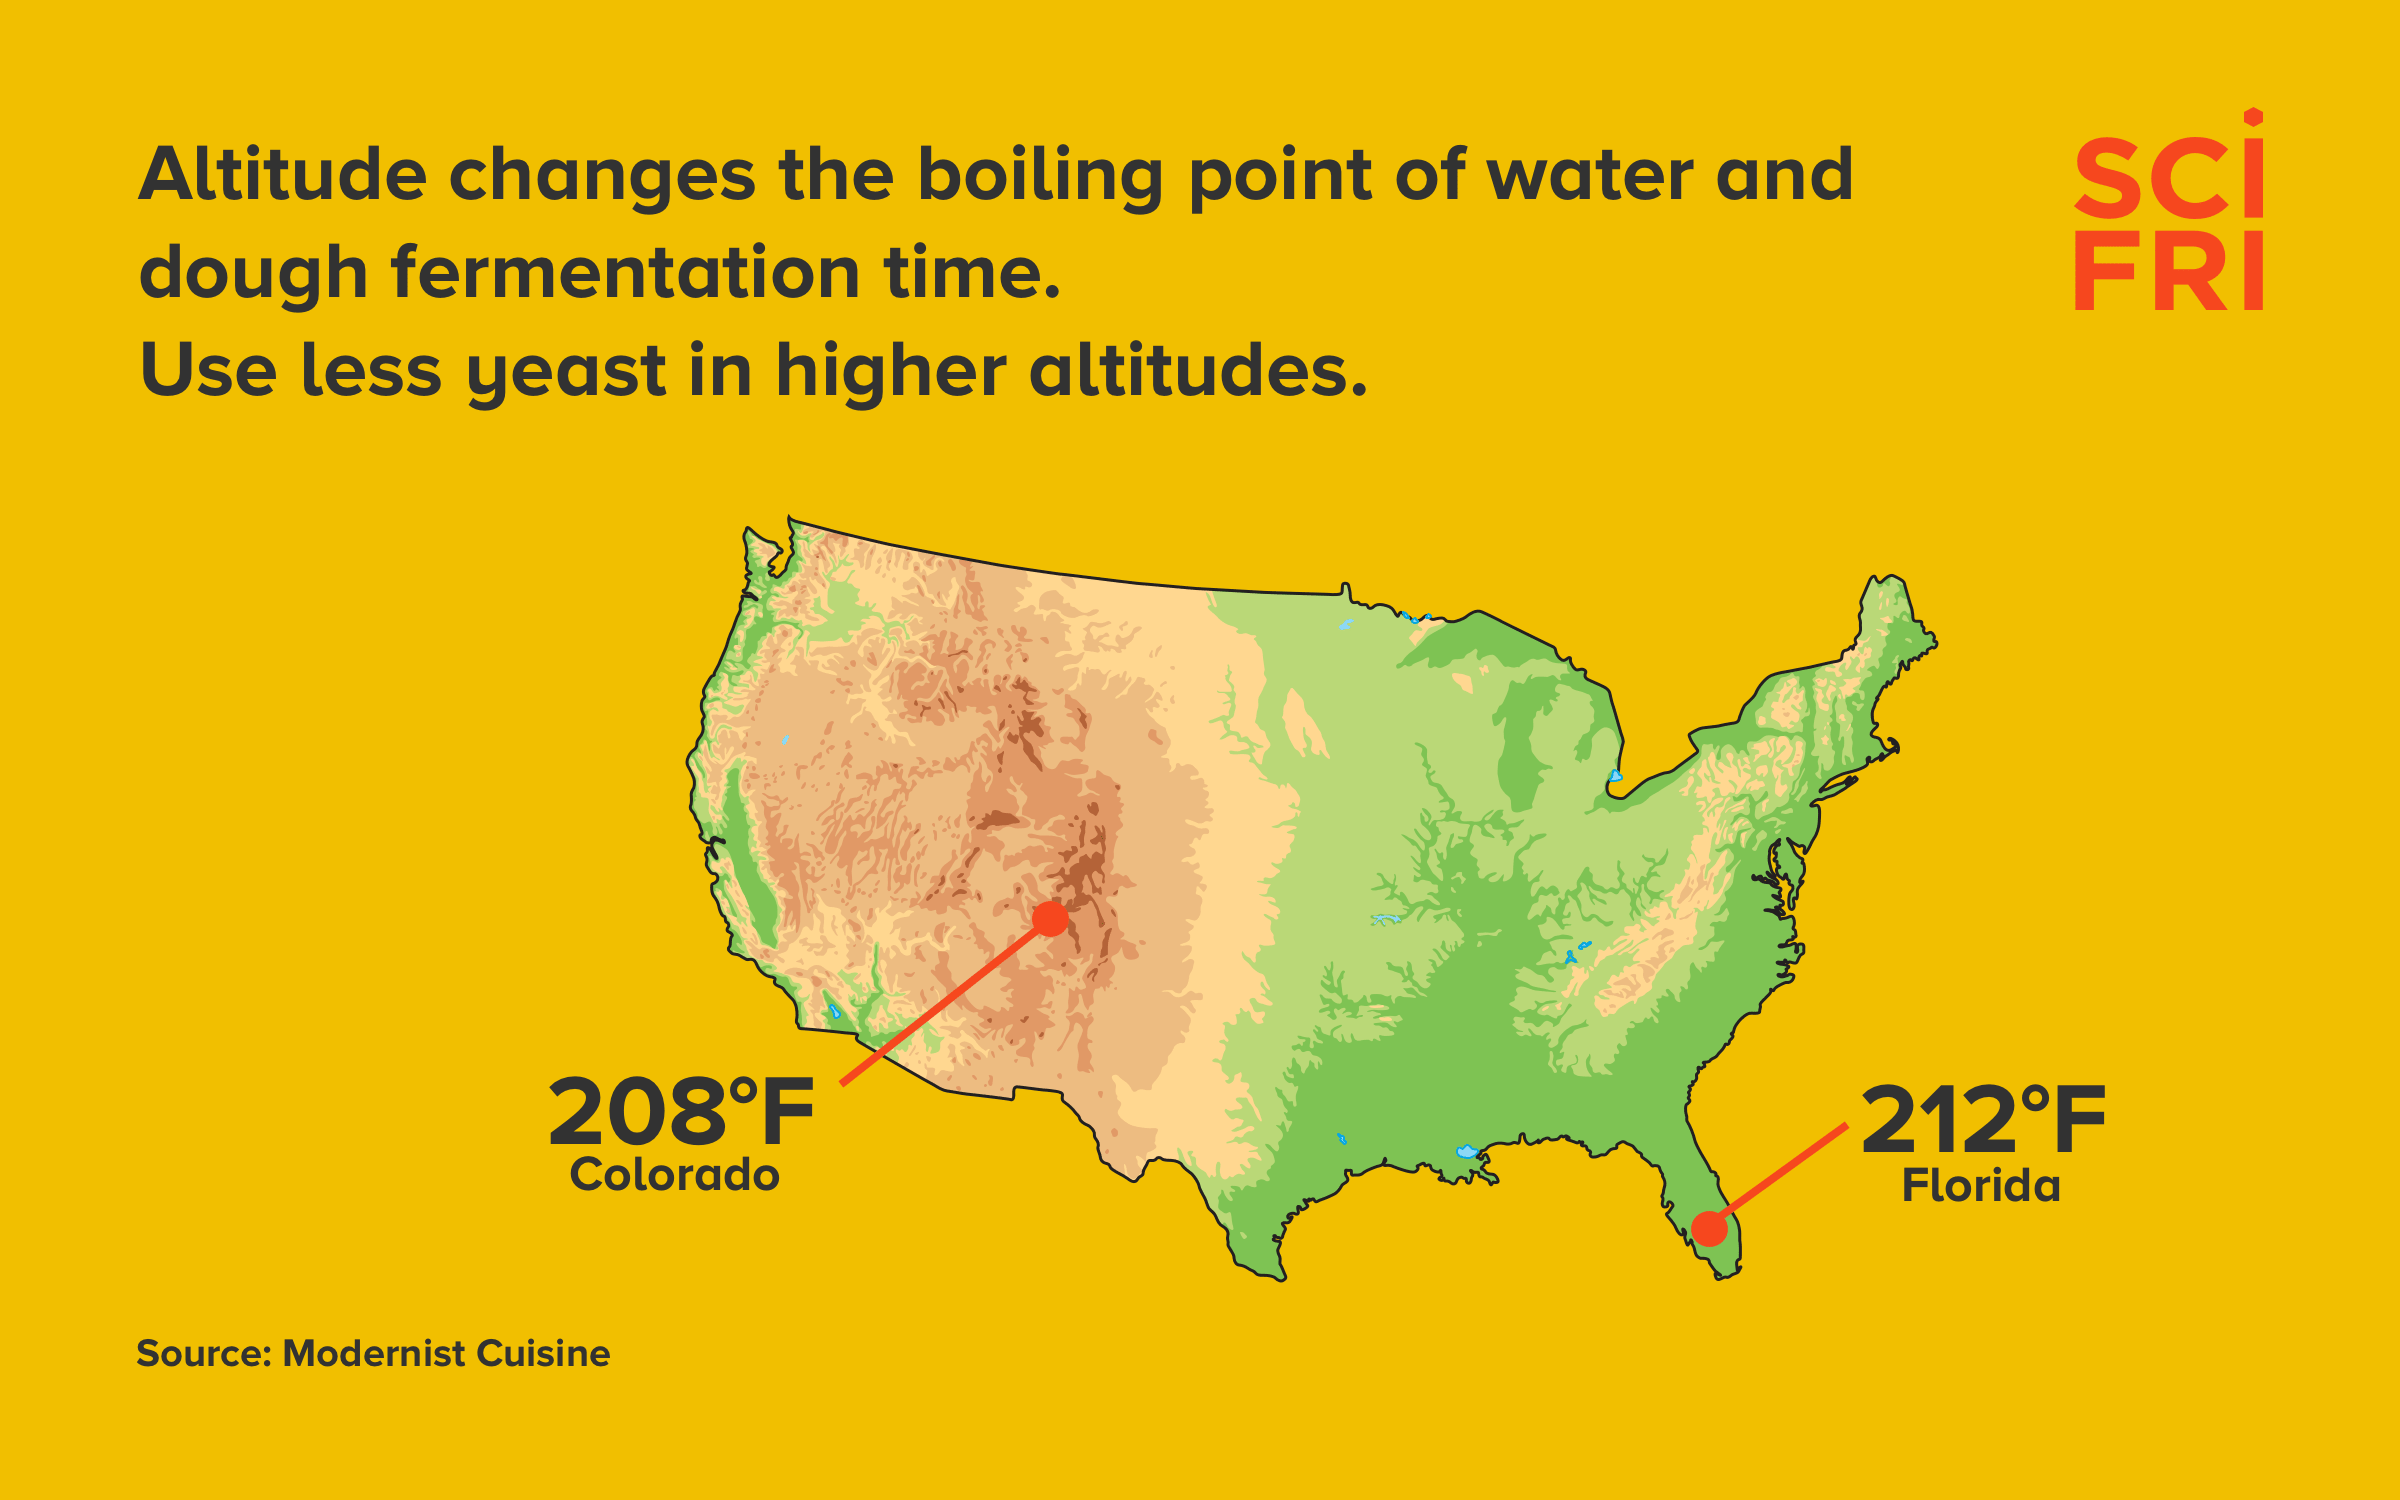 Map of the United States representing different boiling points of water in Colorado and Florida